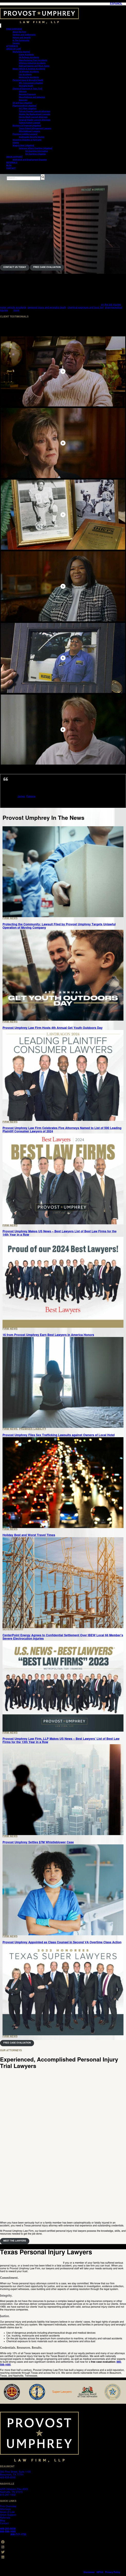 Provost & Umphrey Law Firm LLP - Beaumont TX Lawyers